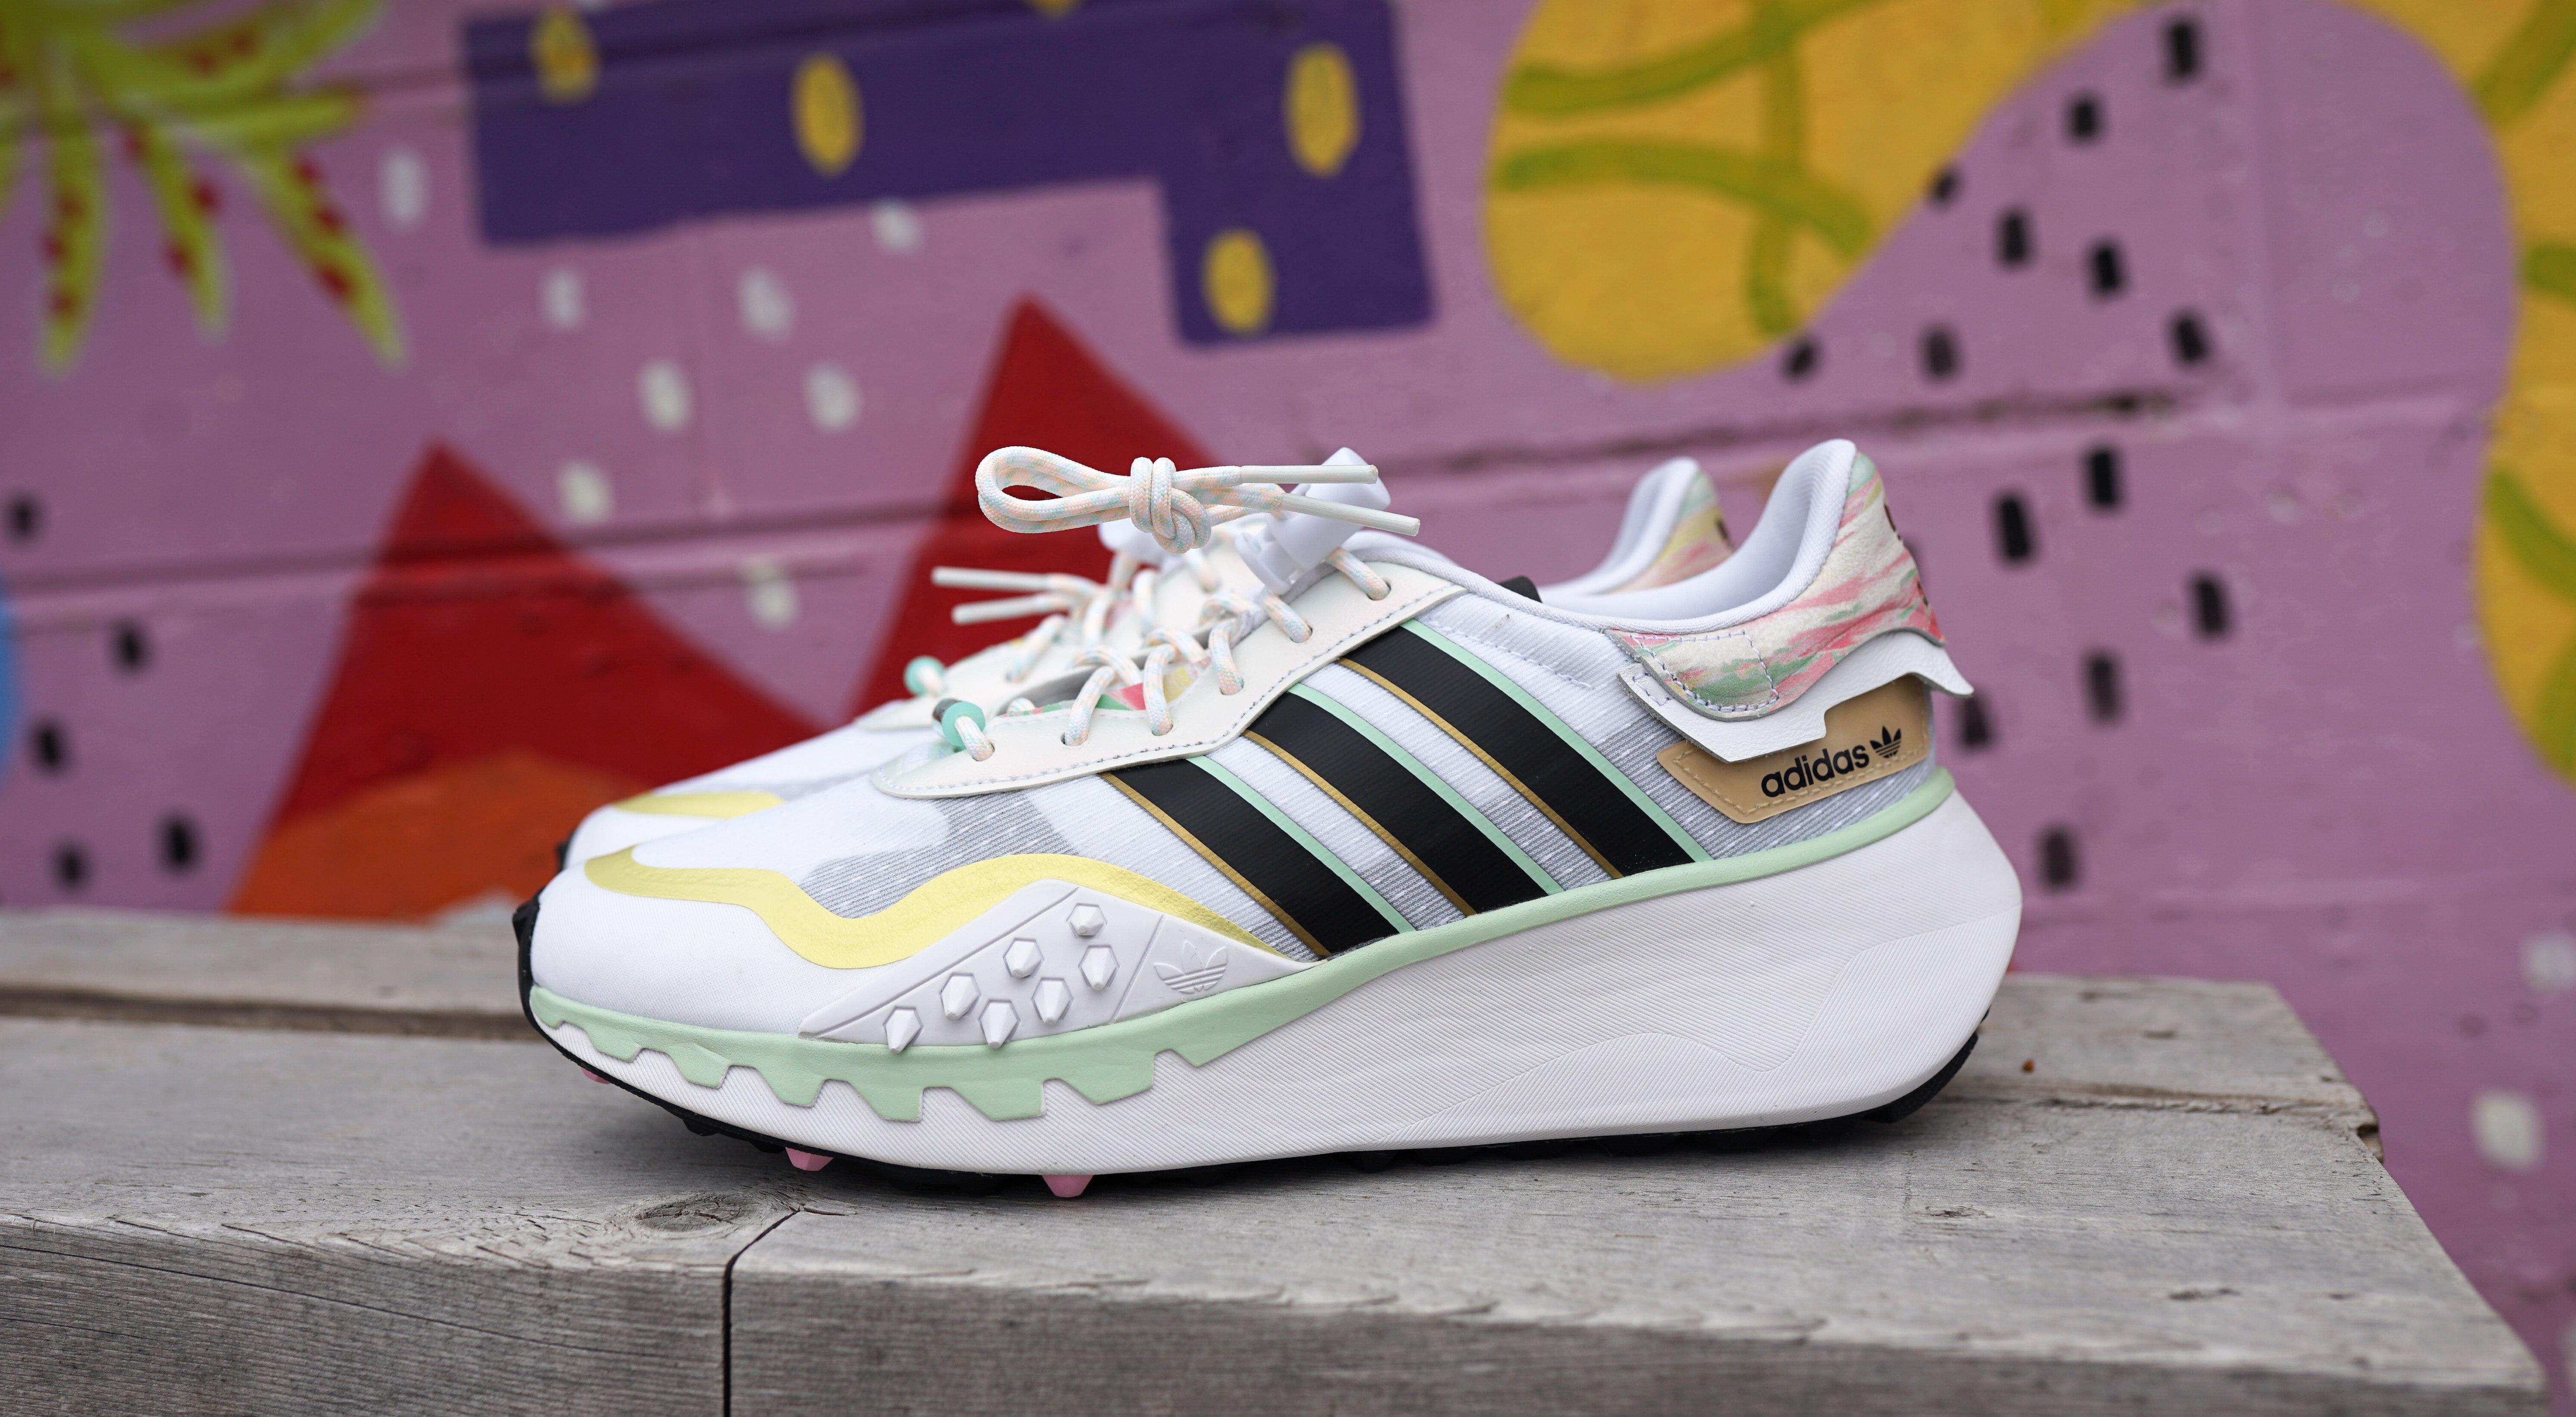 The Bold and Unique Look of Adidas Choigo Sneakers